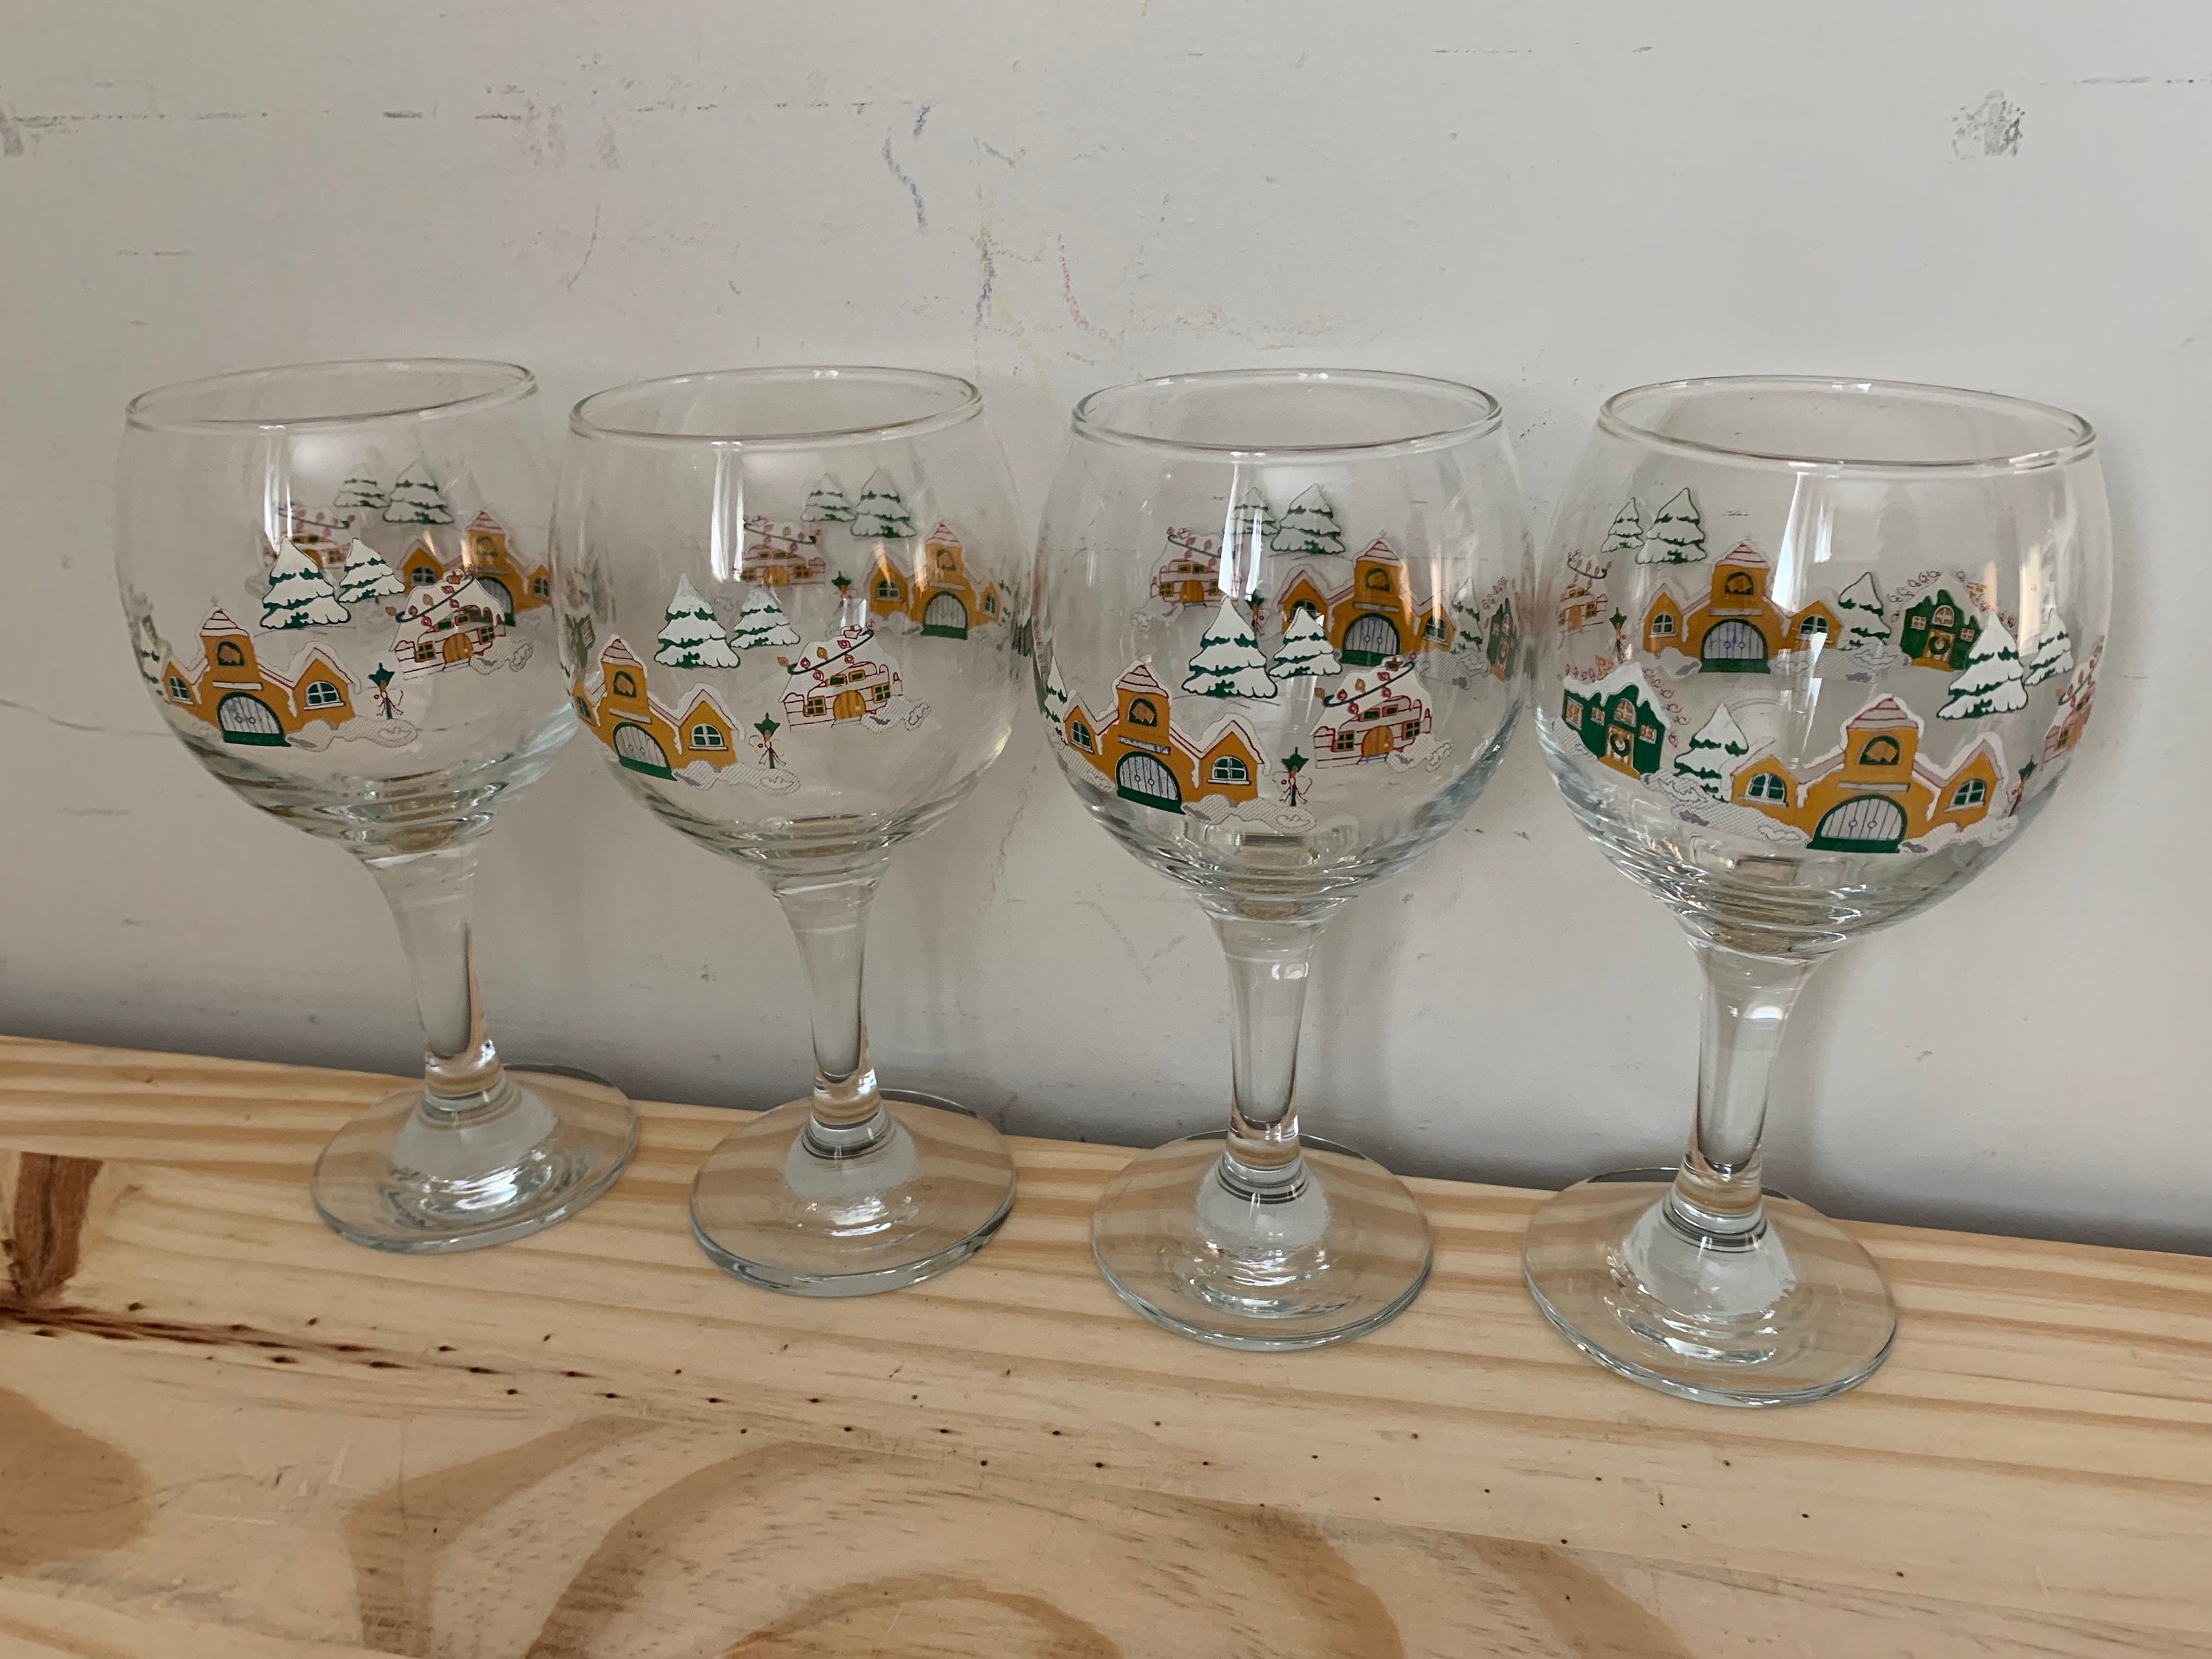 Glass Sets and Stylish Drinking Glasses from Village Creation